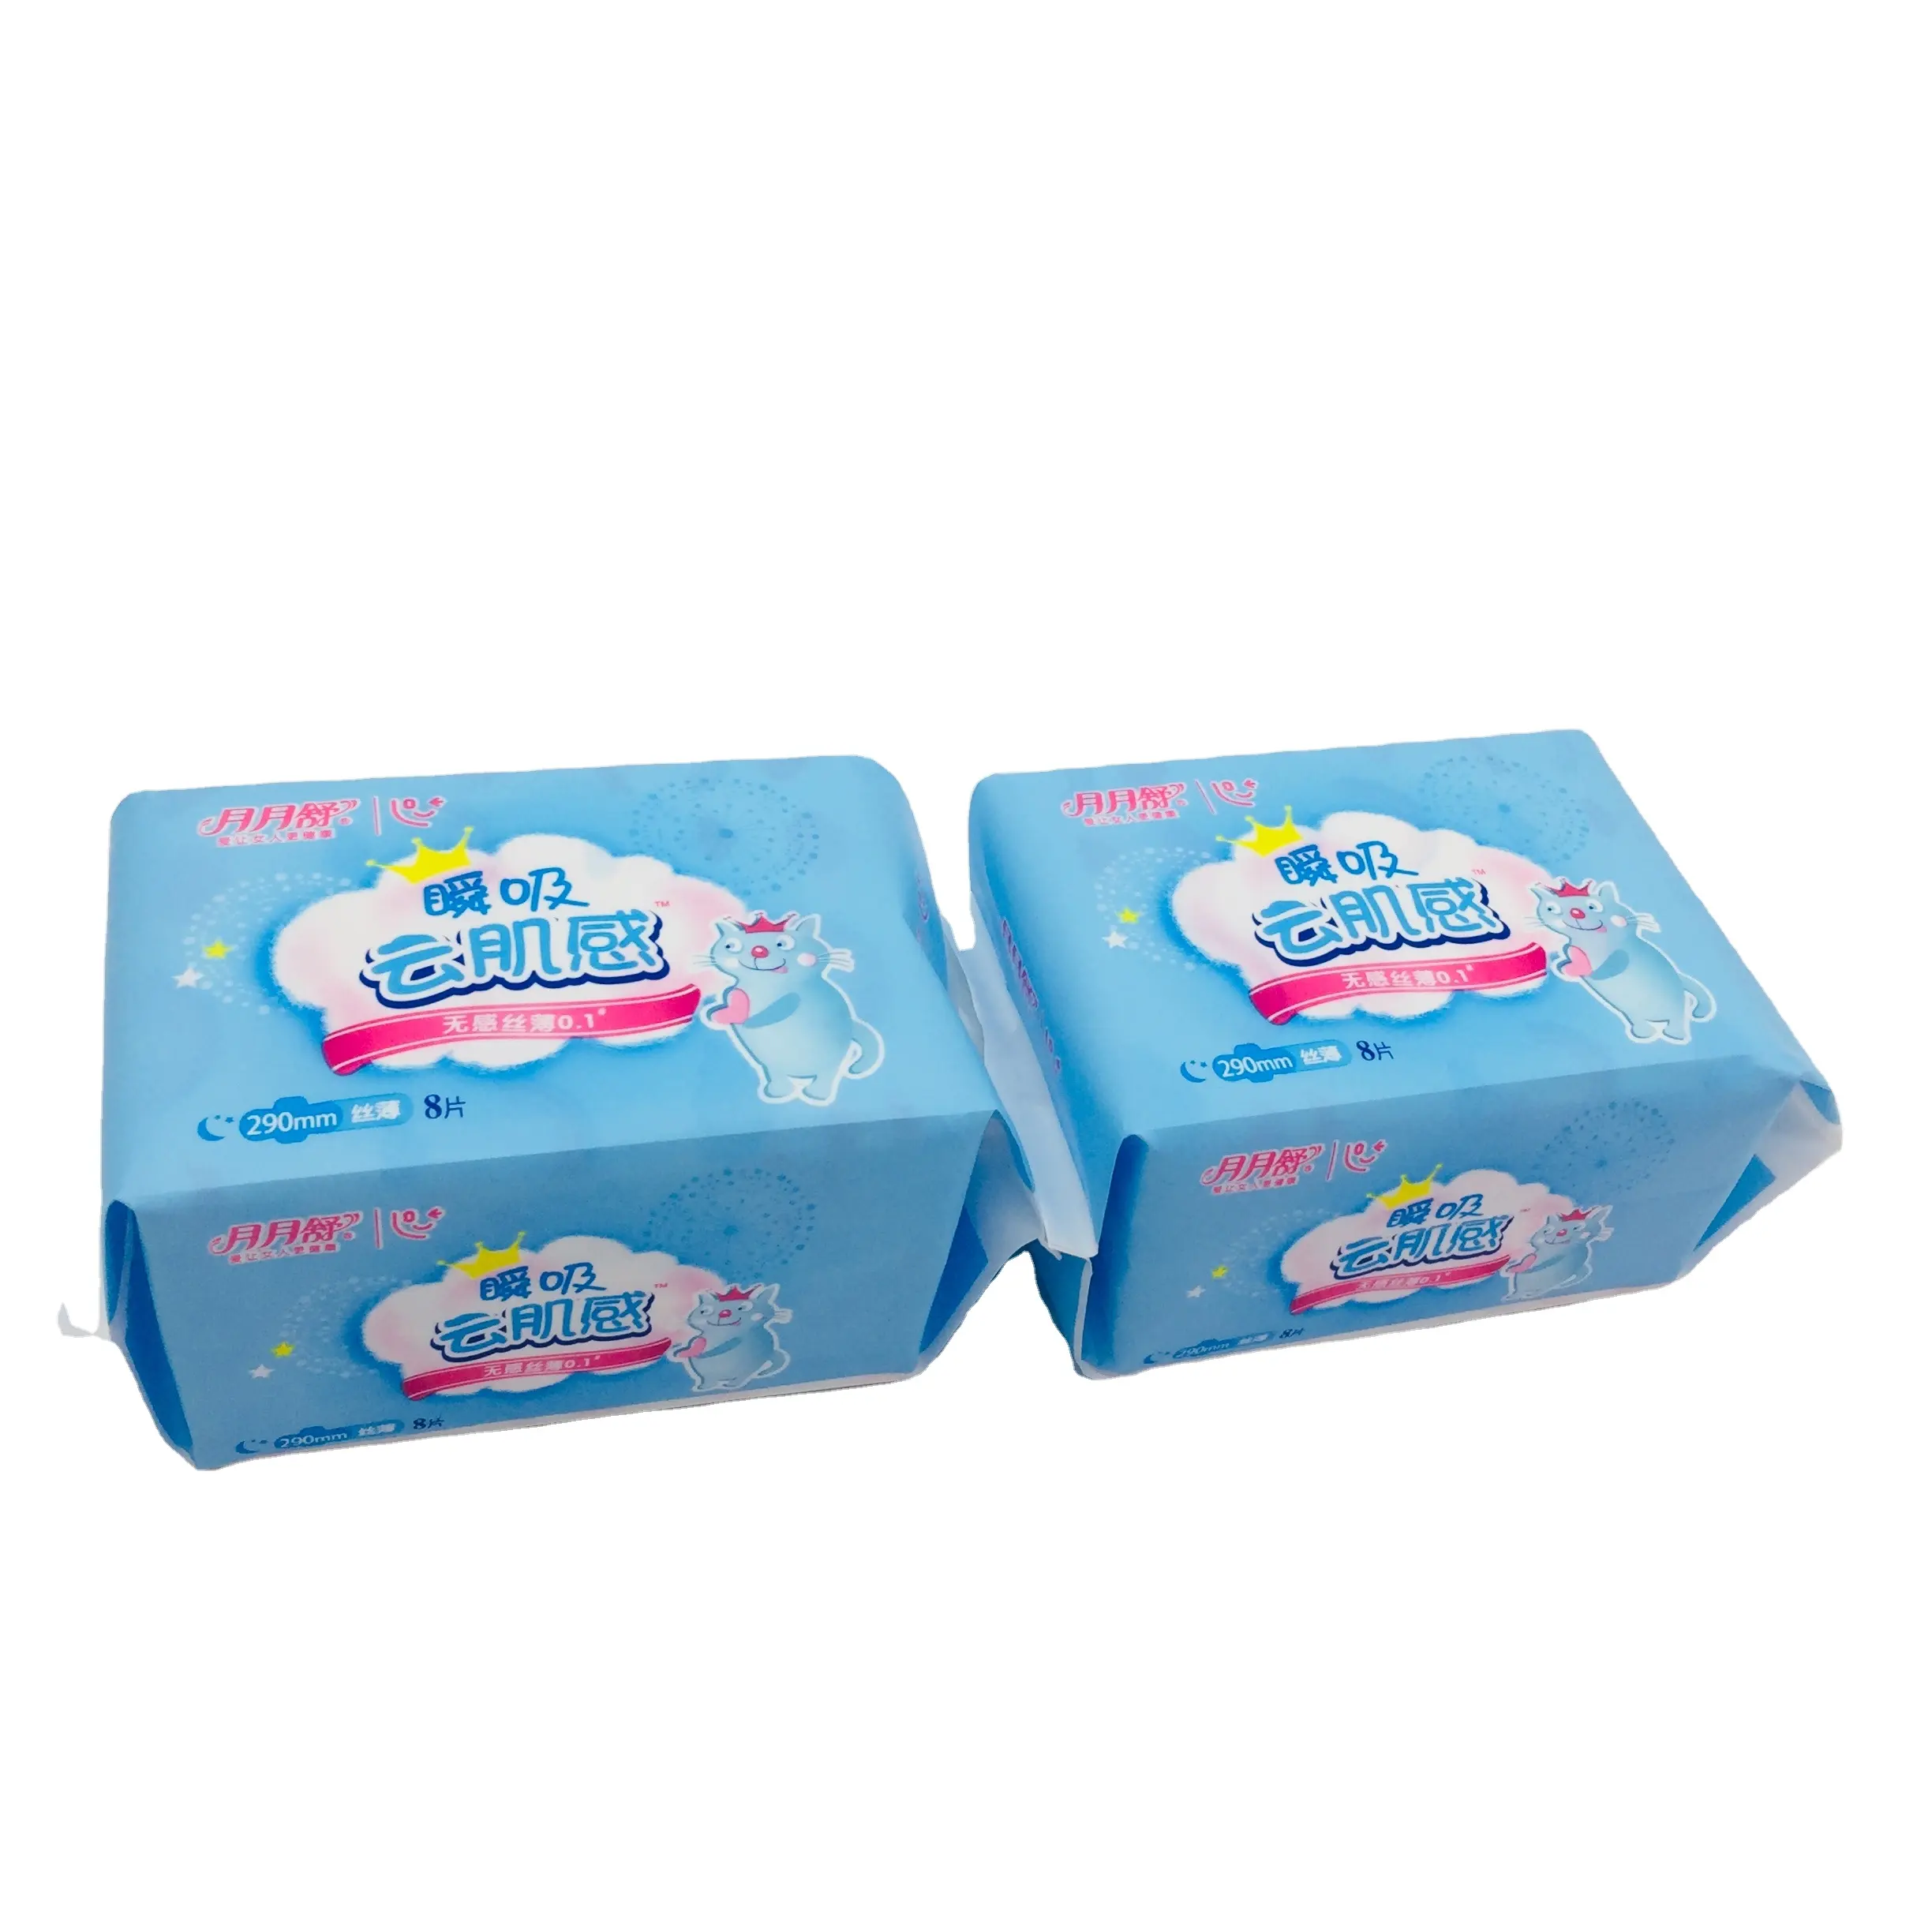 290mm Day Time And Night Use Sanitary Napkin Chinese Sanitary Pad Factory Super Thin Excellent Absorbency Sanitary Pad